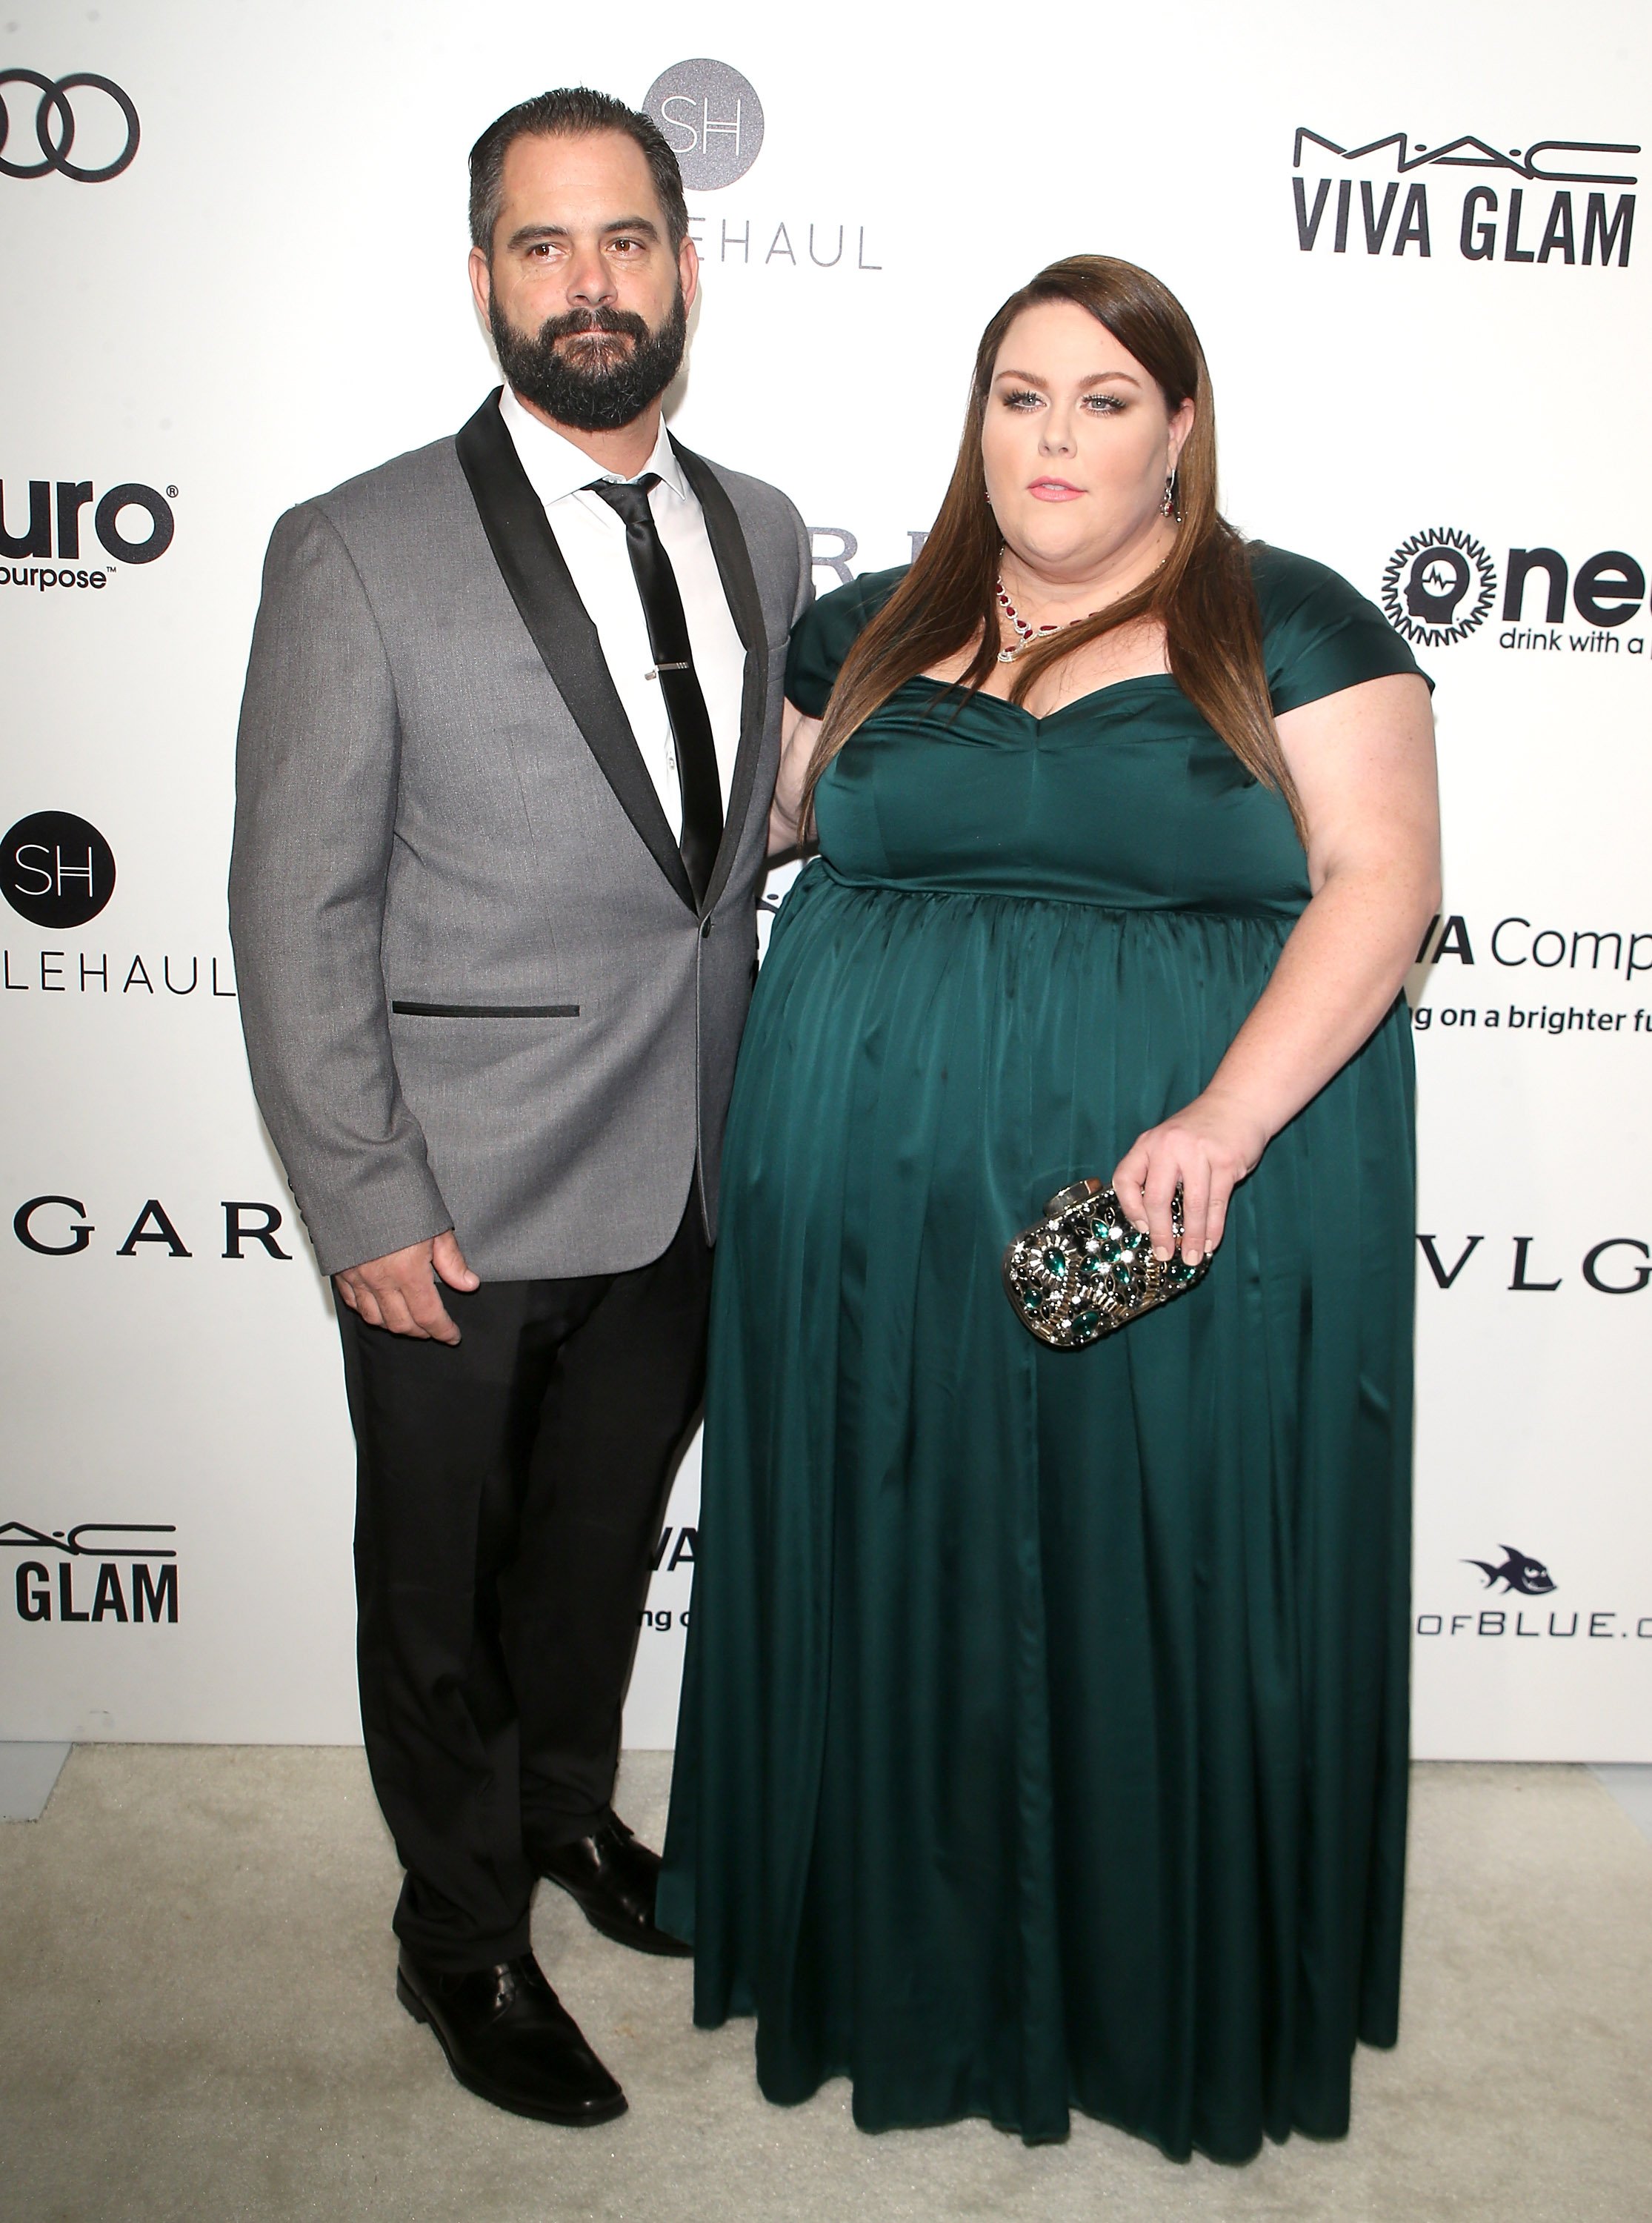  Chrissy Metz and Josh Stancil at the 25th Annual Elton John AIDS Foundation's Oscar viewing party, 2017, West Hollywood, California. | Photo: Getty Images